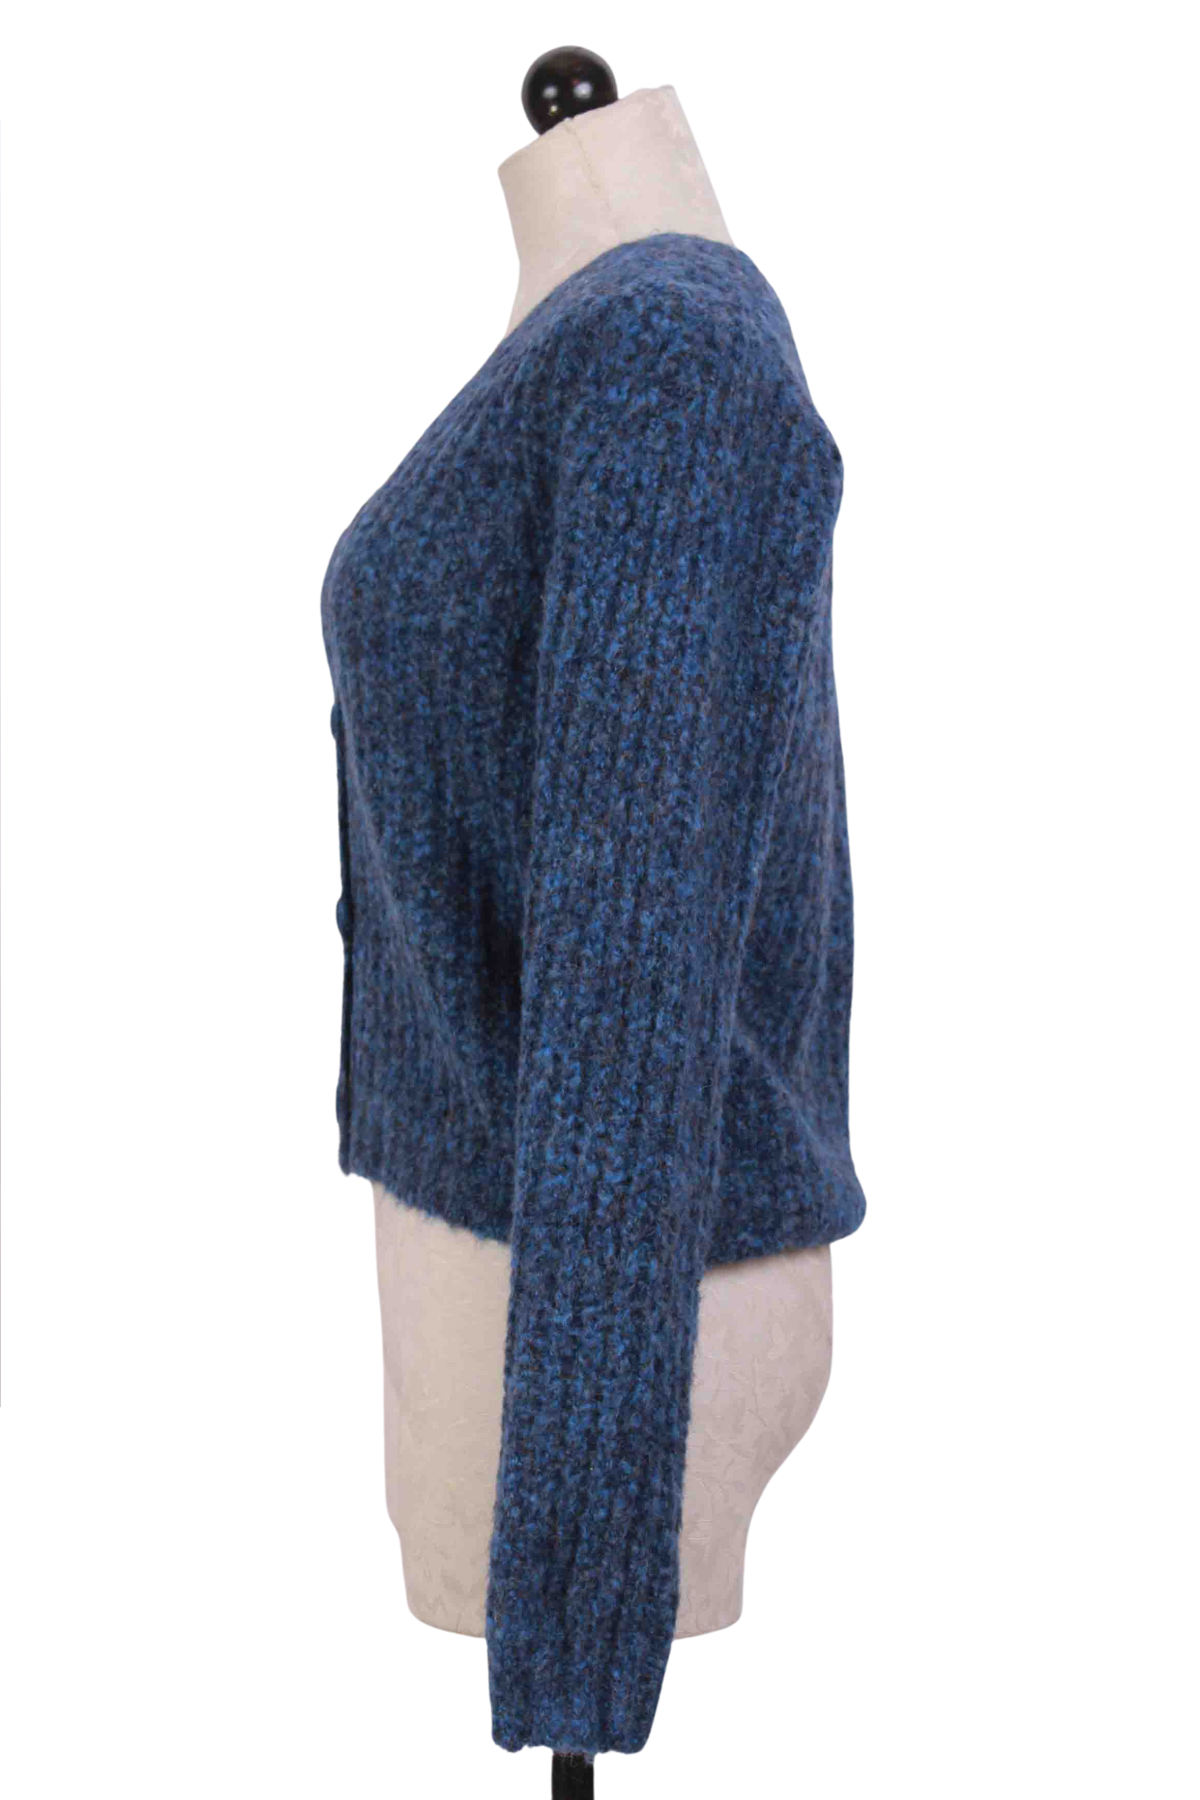 side view of Blue V Neck Cable Knit Cardigan by Compania Fantastica